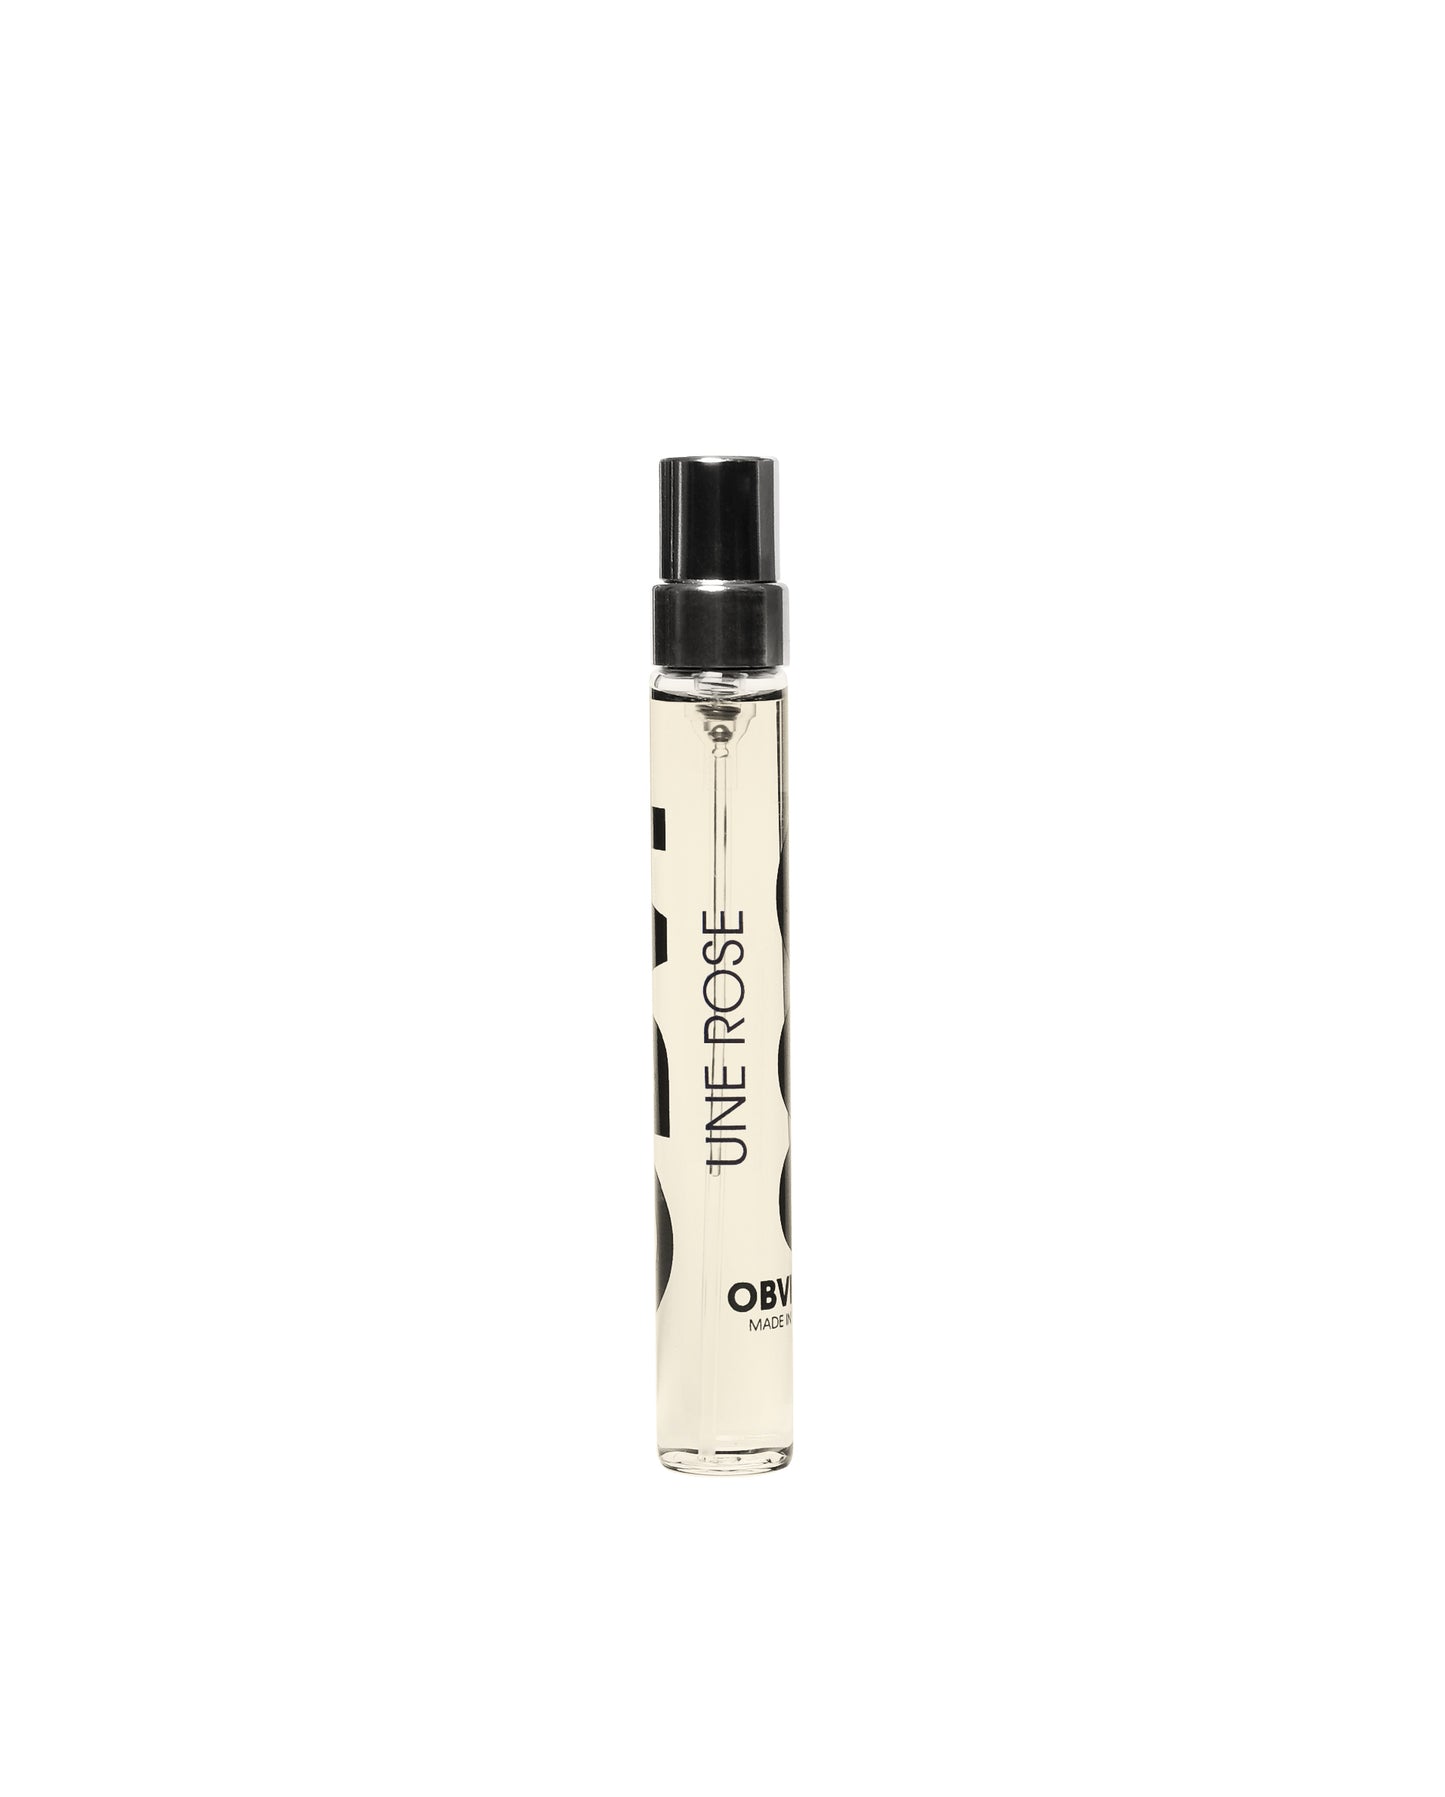 Obvious Parfums Une Rose 9ml